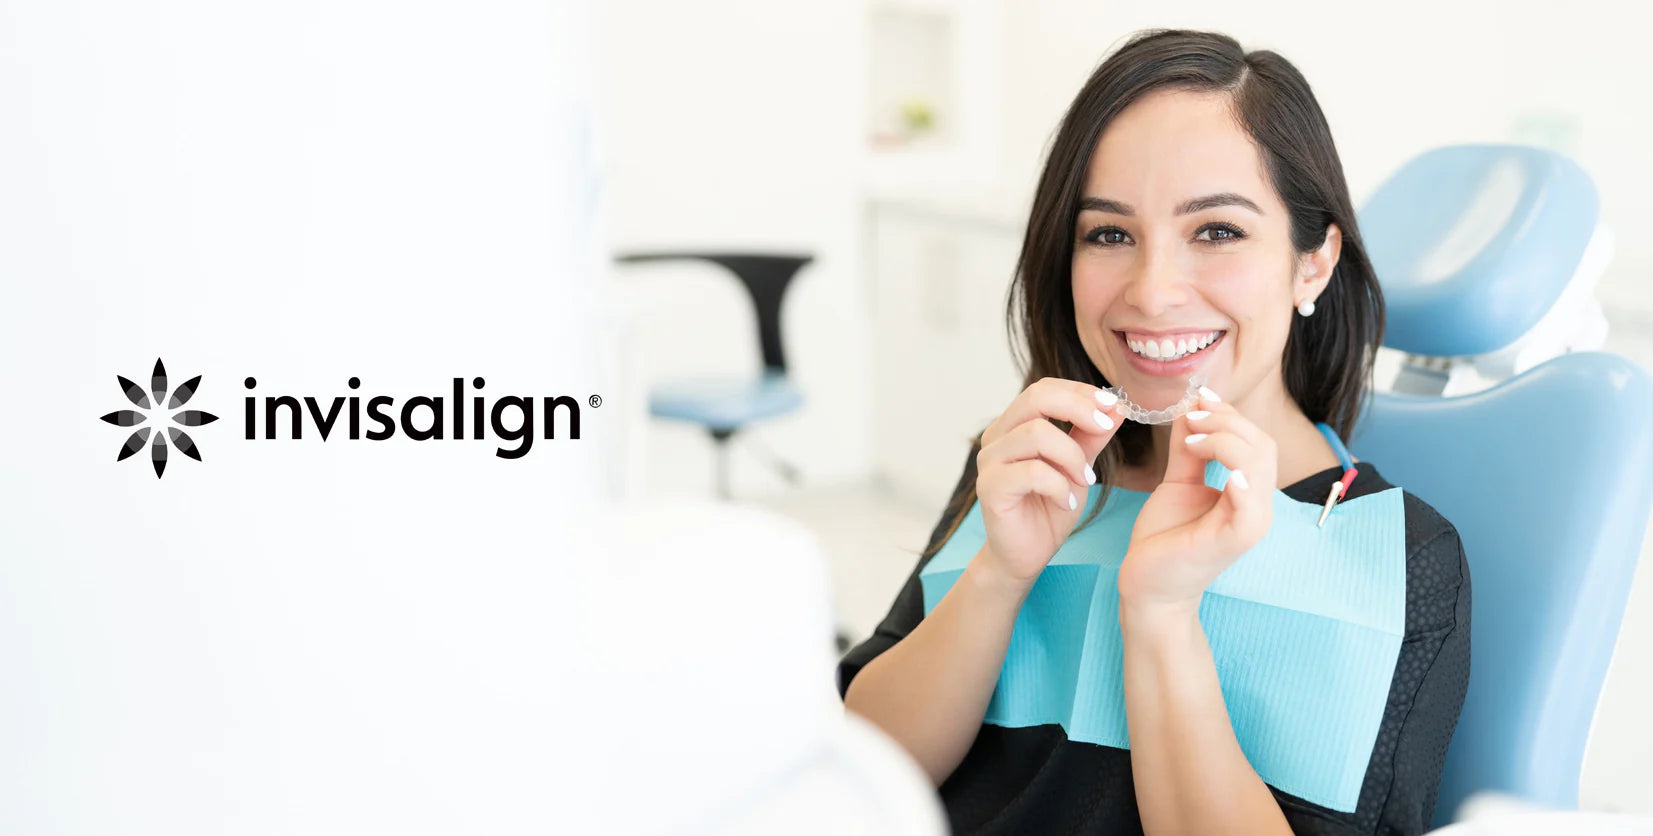 3 reasons why Invisalign could make you happier